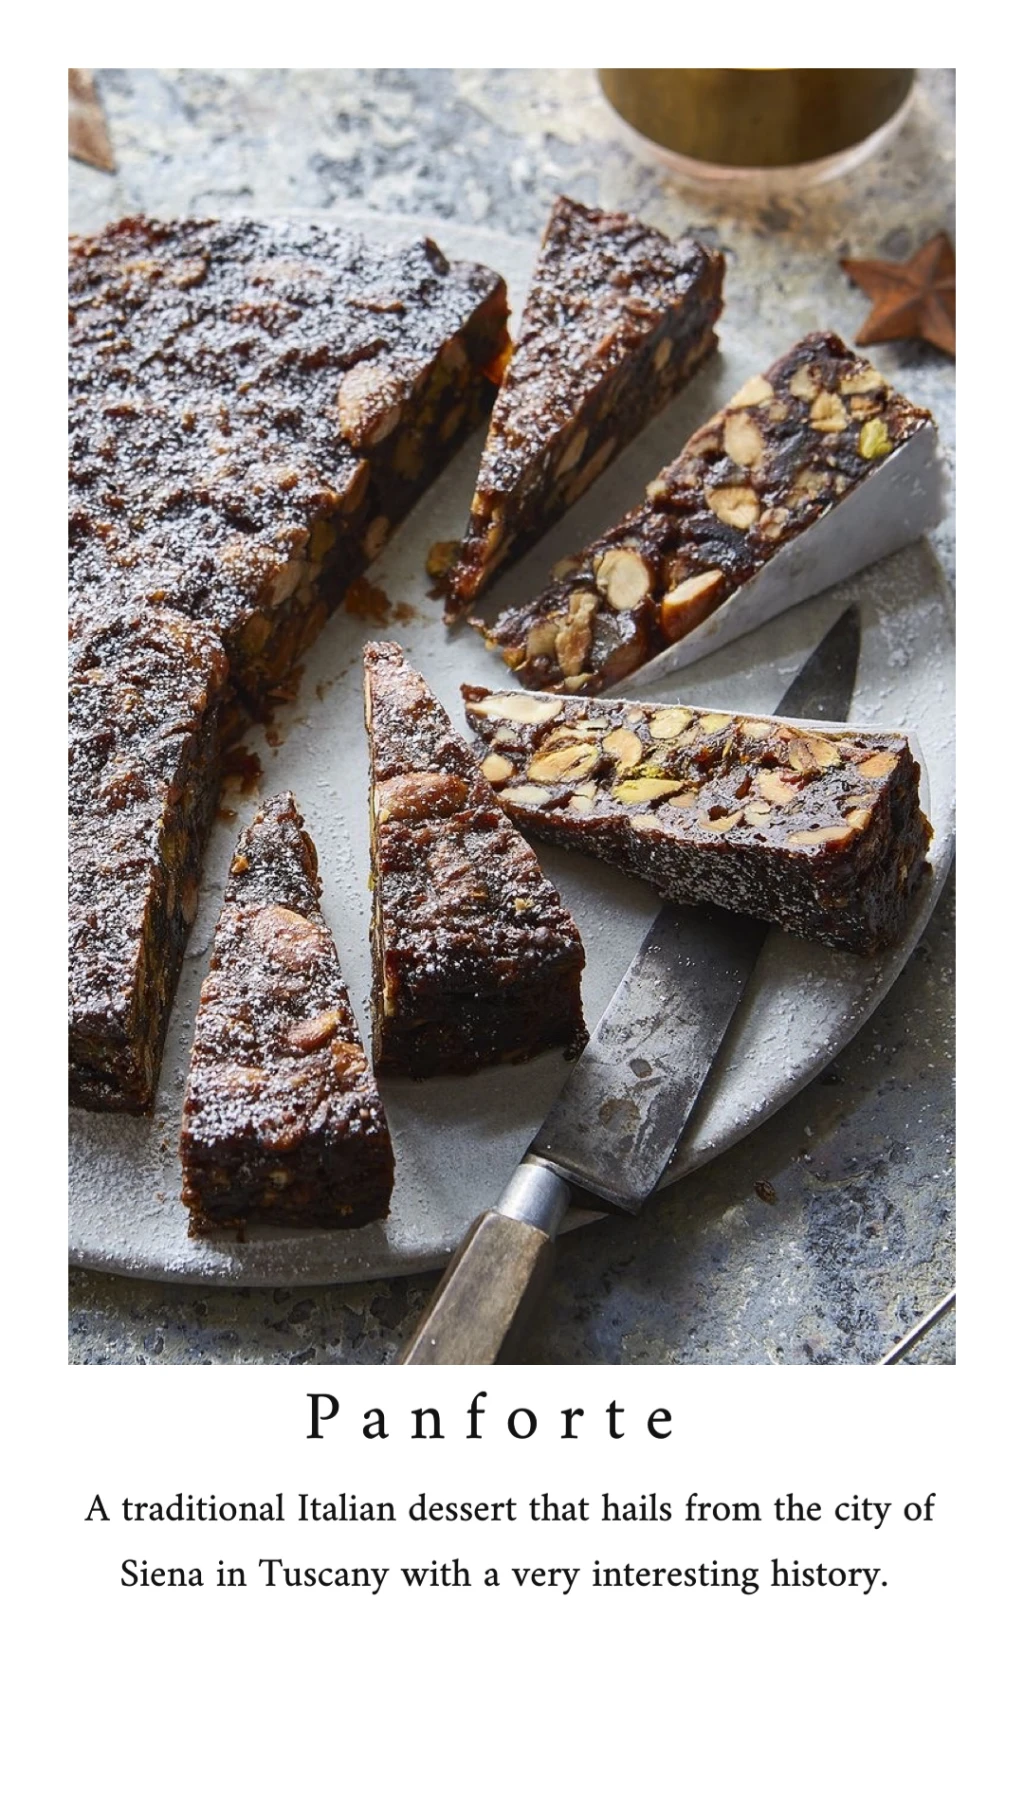 Panforte is a traditional Italian dessert that hails from the city of Siena in Tuscany. I